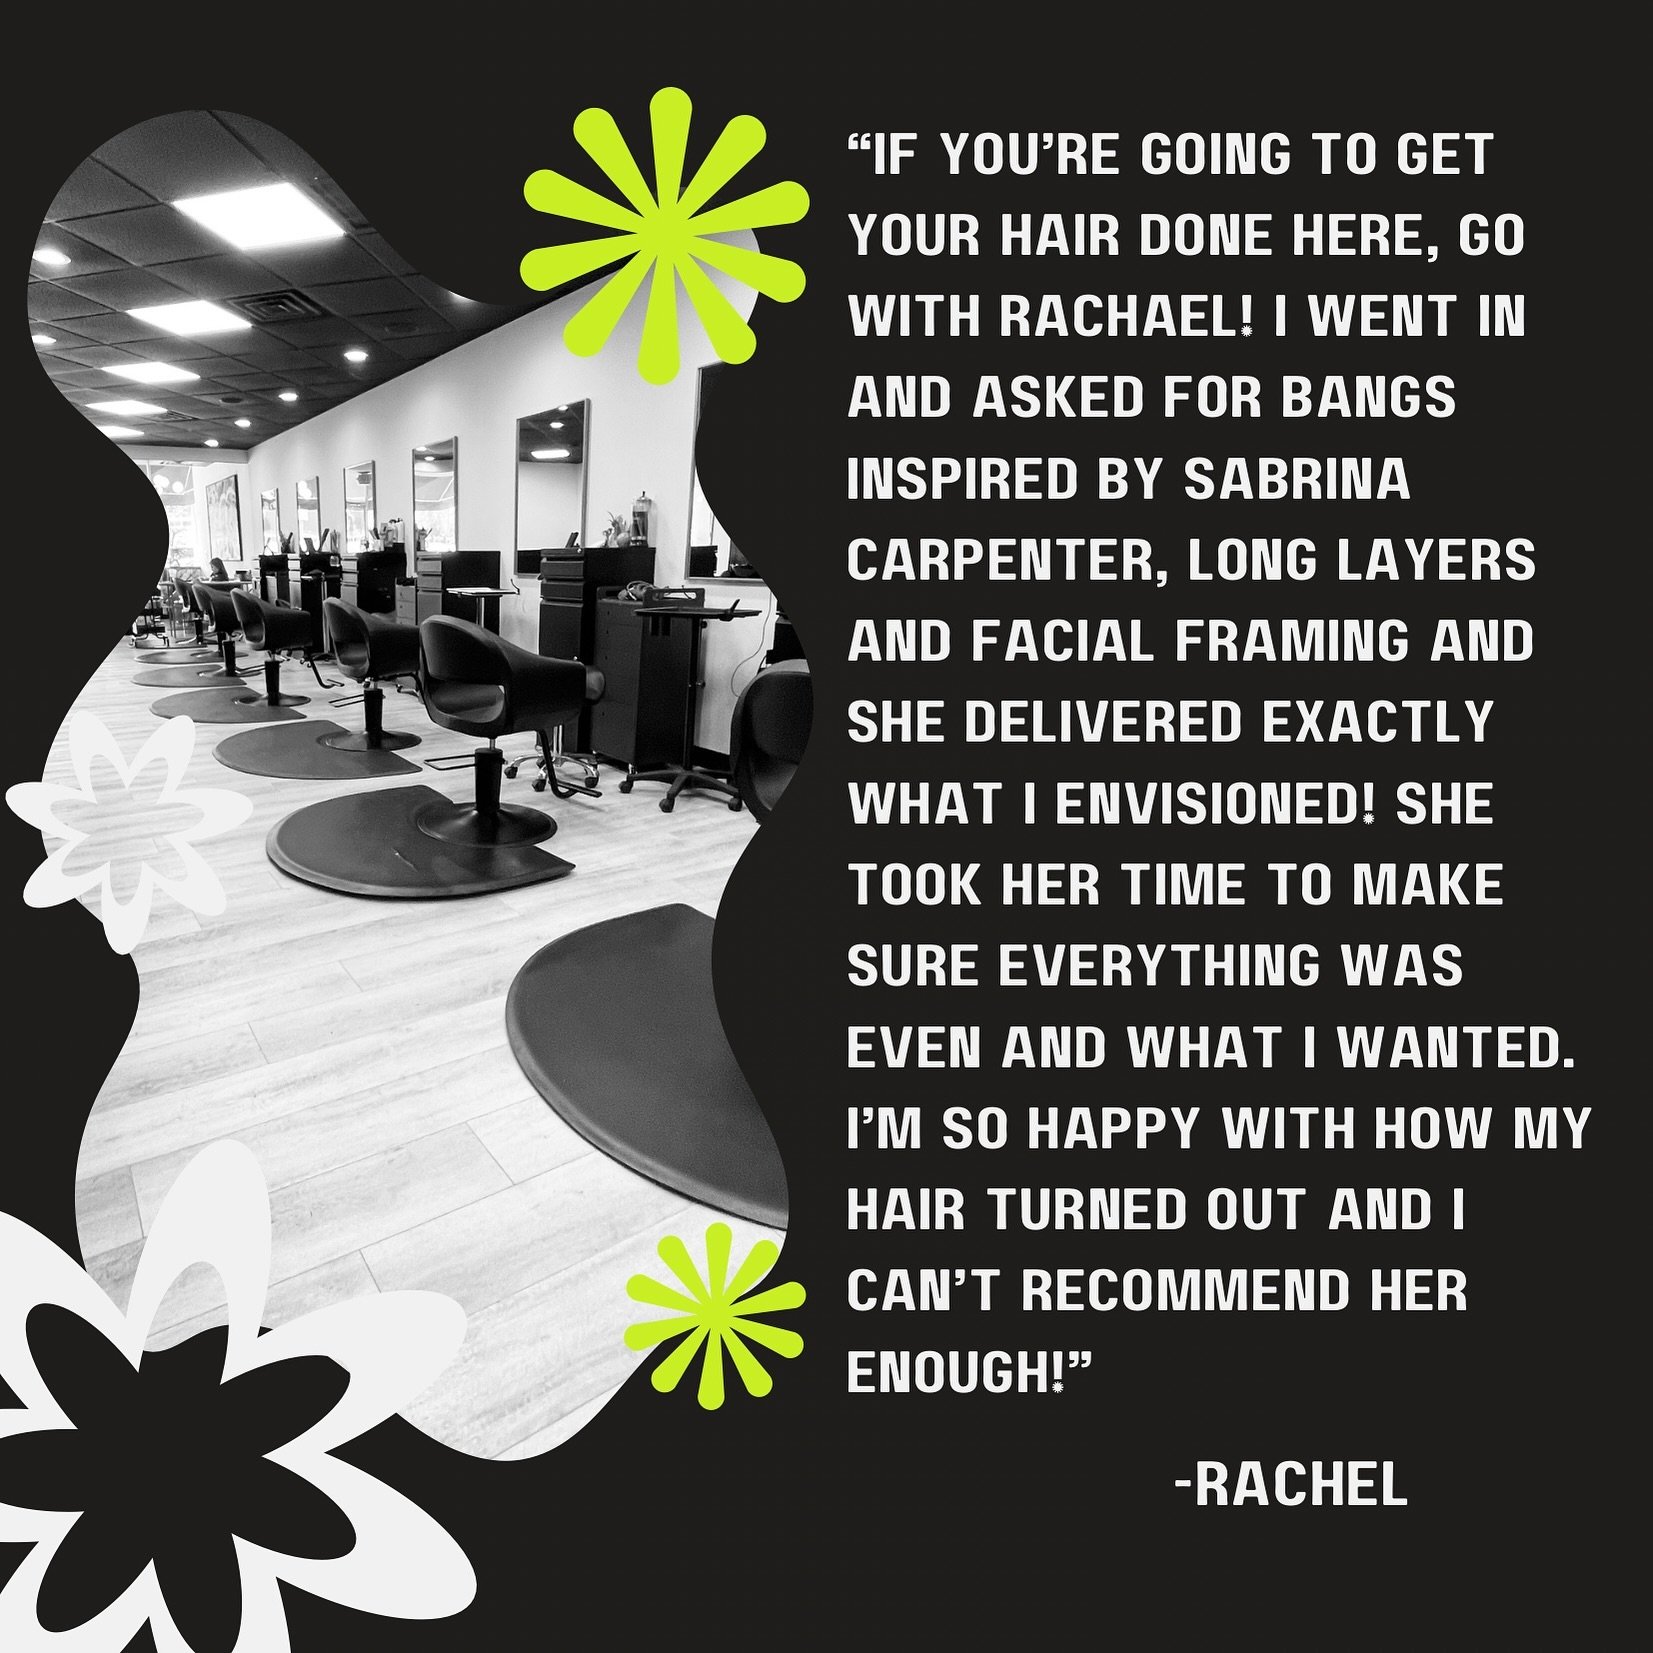 We love our guests and love when they share the love via Google reviews! It means the world to us!

@rachaelprismhair got some love this week from her guestie. Get it Rachael! 🖤